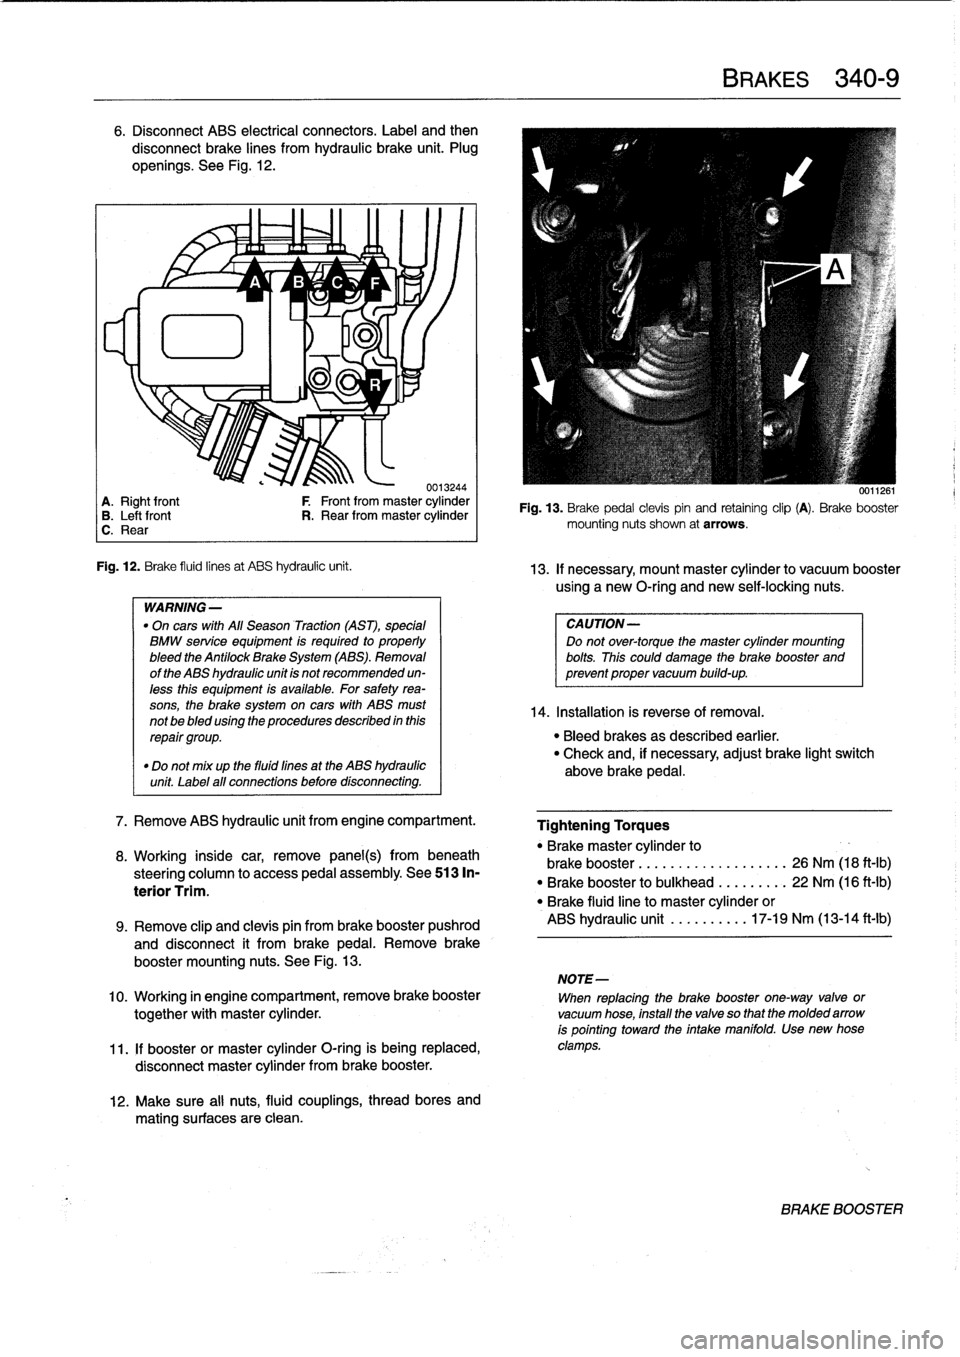 BMW 323i 1993 E36 Service Manual 6
.
Disconnect
ABS
electrical
connectors
.
Label
and
then

disconnect
brake
lines
from
hydraulic
brake
unit
.
Plug

openíngs
.
See
Fig
.
12
.

~
~
A
1/
B
1v
C
~
F

lu
11
-ri
J
.

0013244
A
.
Right
f